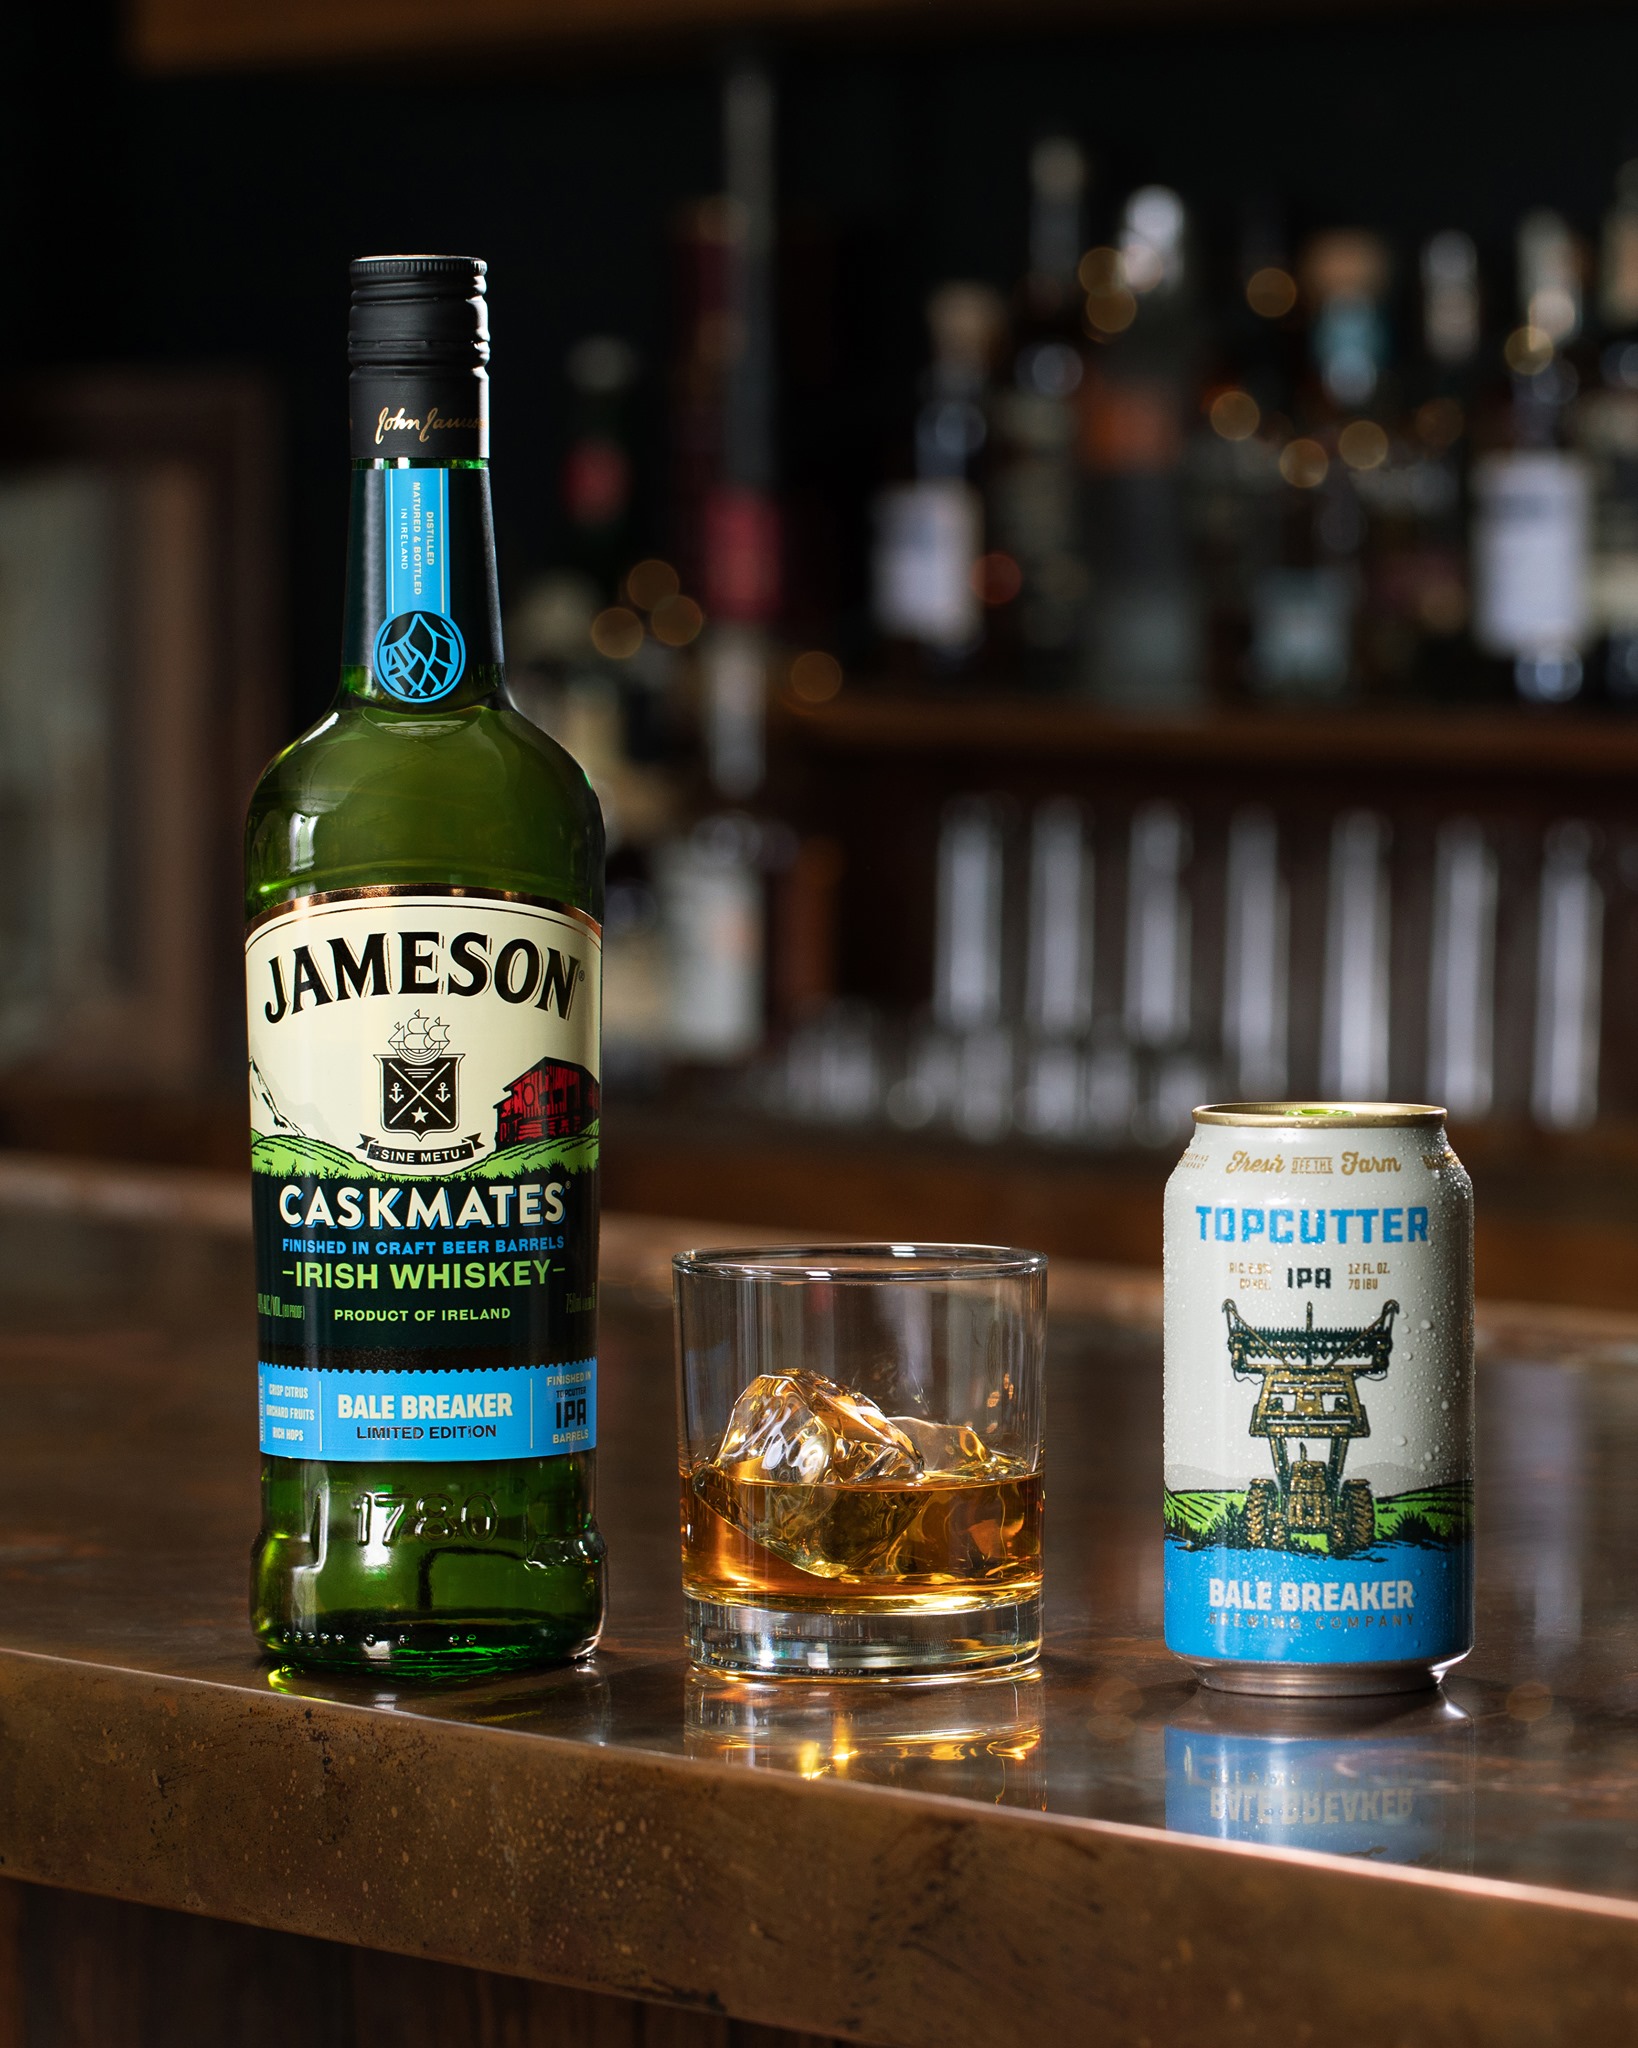 Jameson Caskmates Top Cutter IPA Edition. (image courtesy of Jameson)